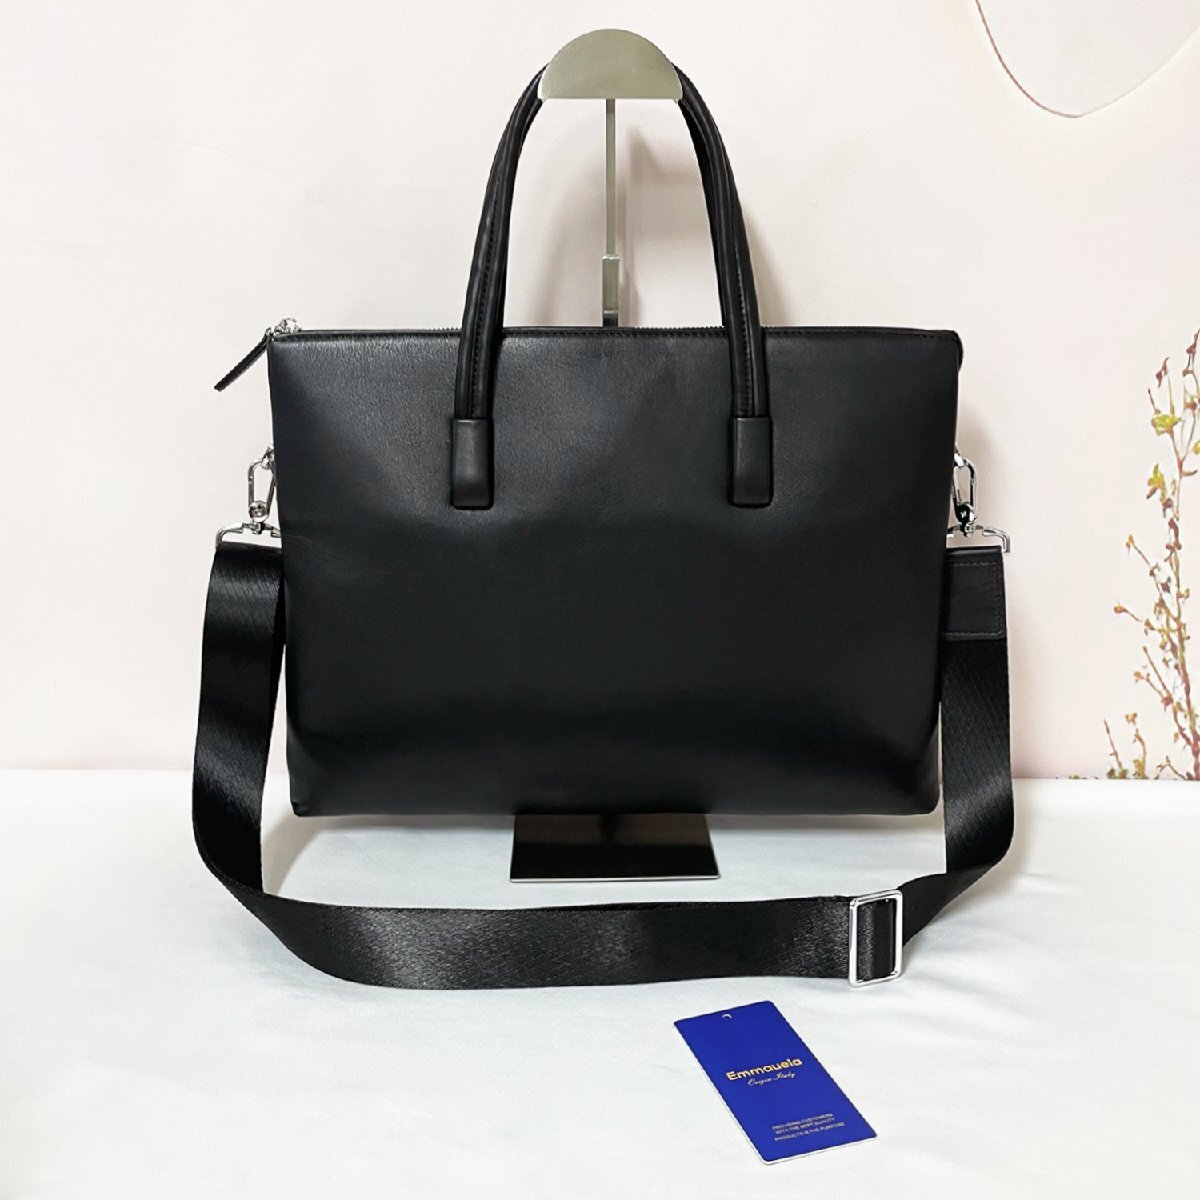  high class * briefcase regular price 12 ten thousand *Emmauela* Italy * milano departure * high quality cow leather leather thin type business bag 2WAY shoulder .. formal men's 